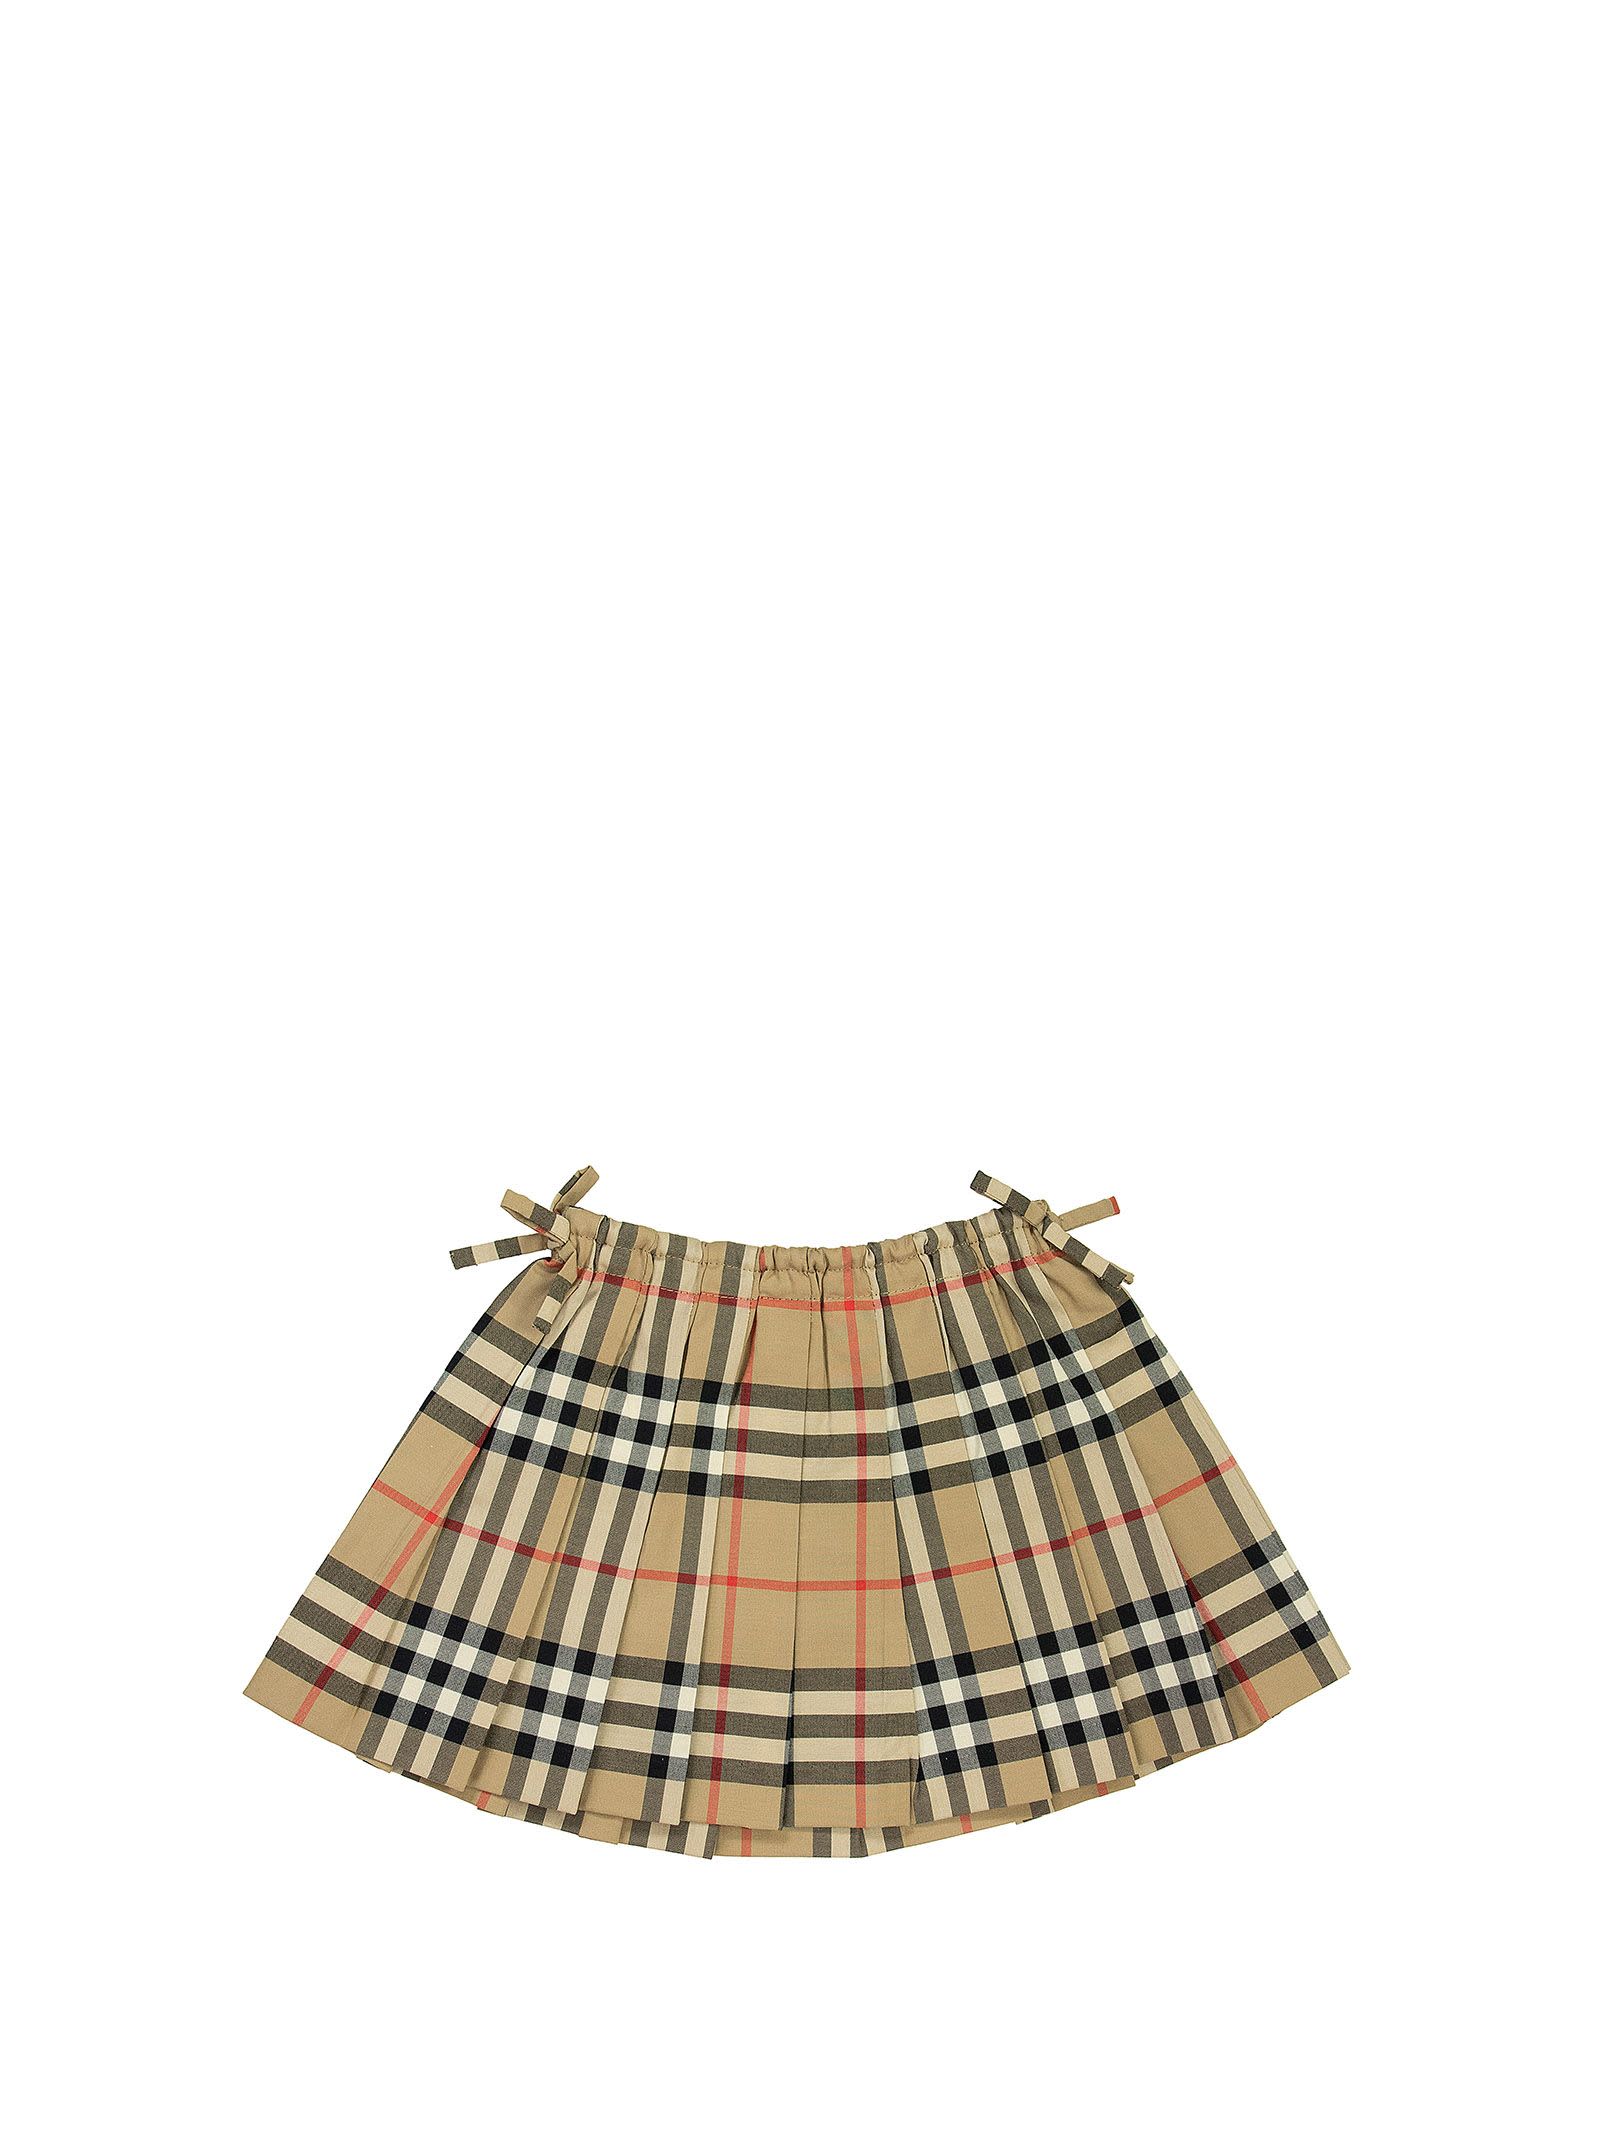 Burberry Mini Pearly - Vintage Check Cotton Pleated Skirt